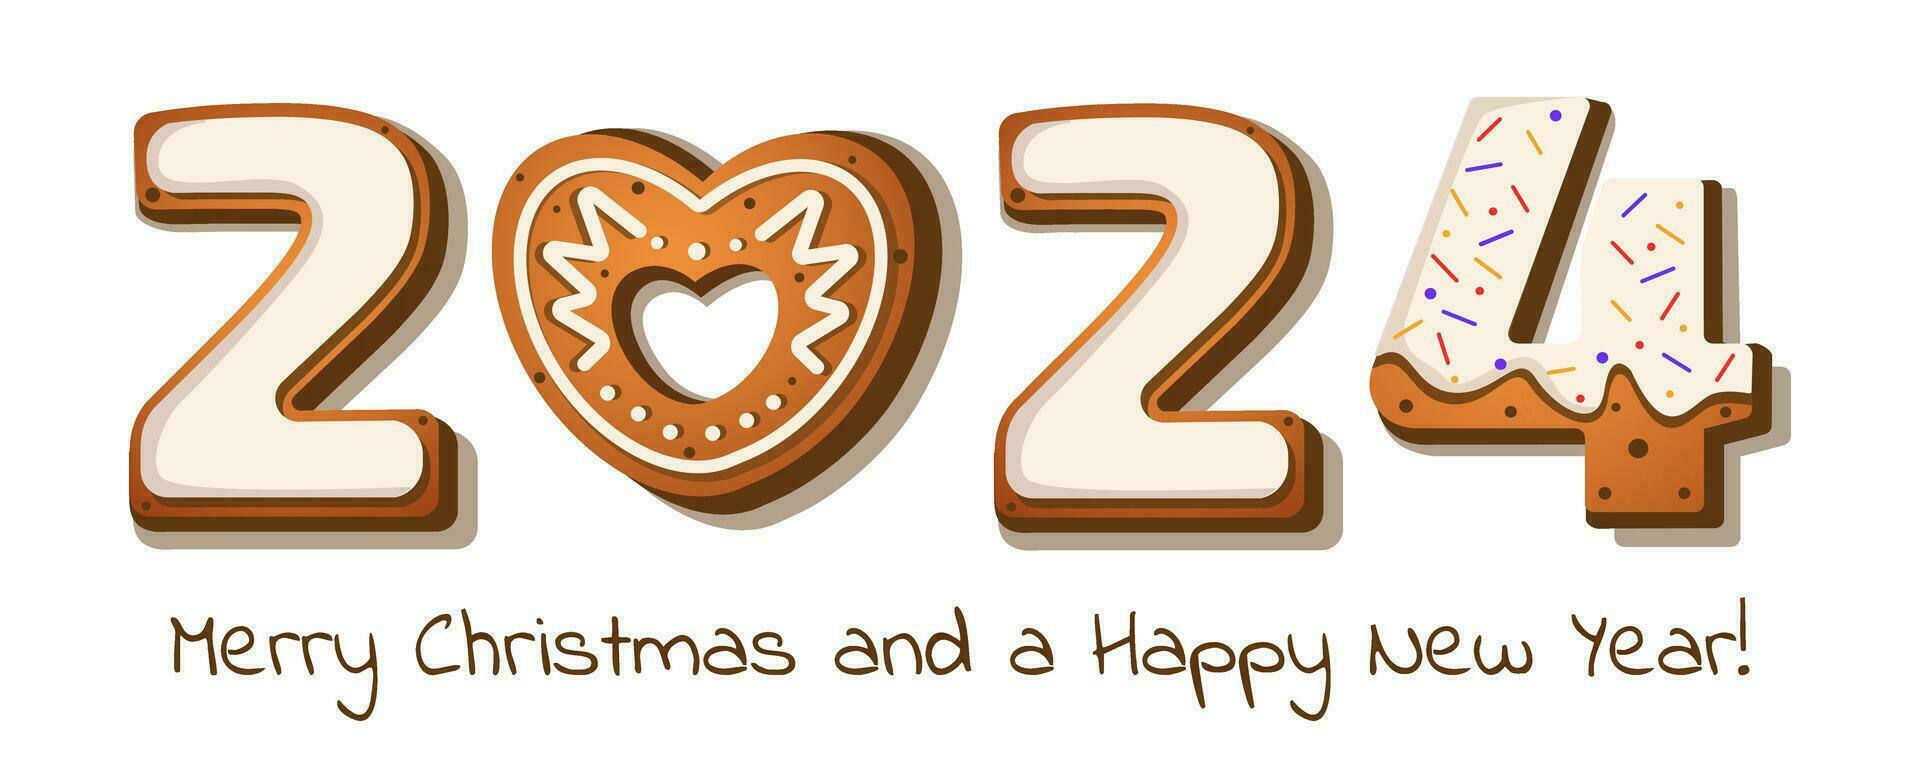 gingerbread cookies in the form of numbers 2024 in cartoon style on a white background vector